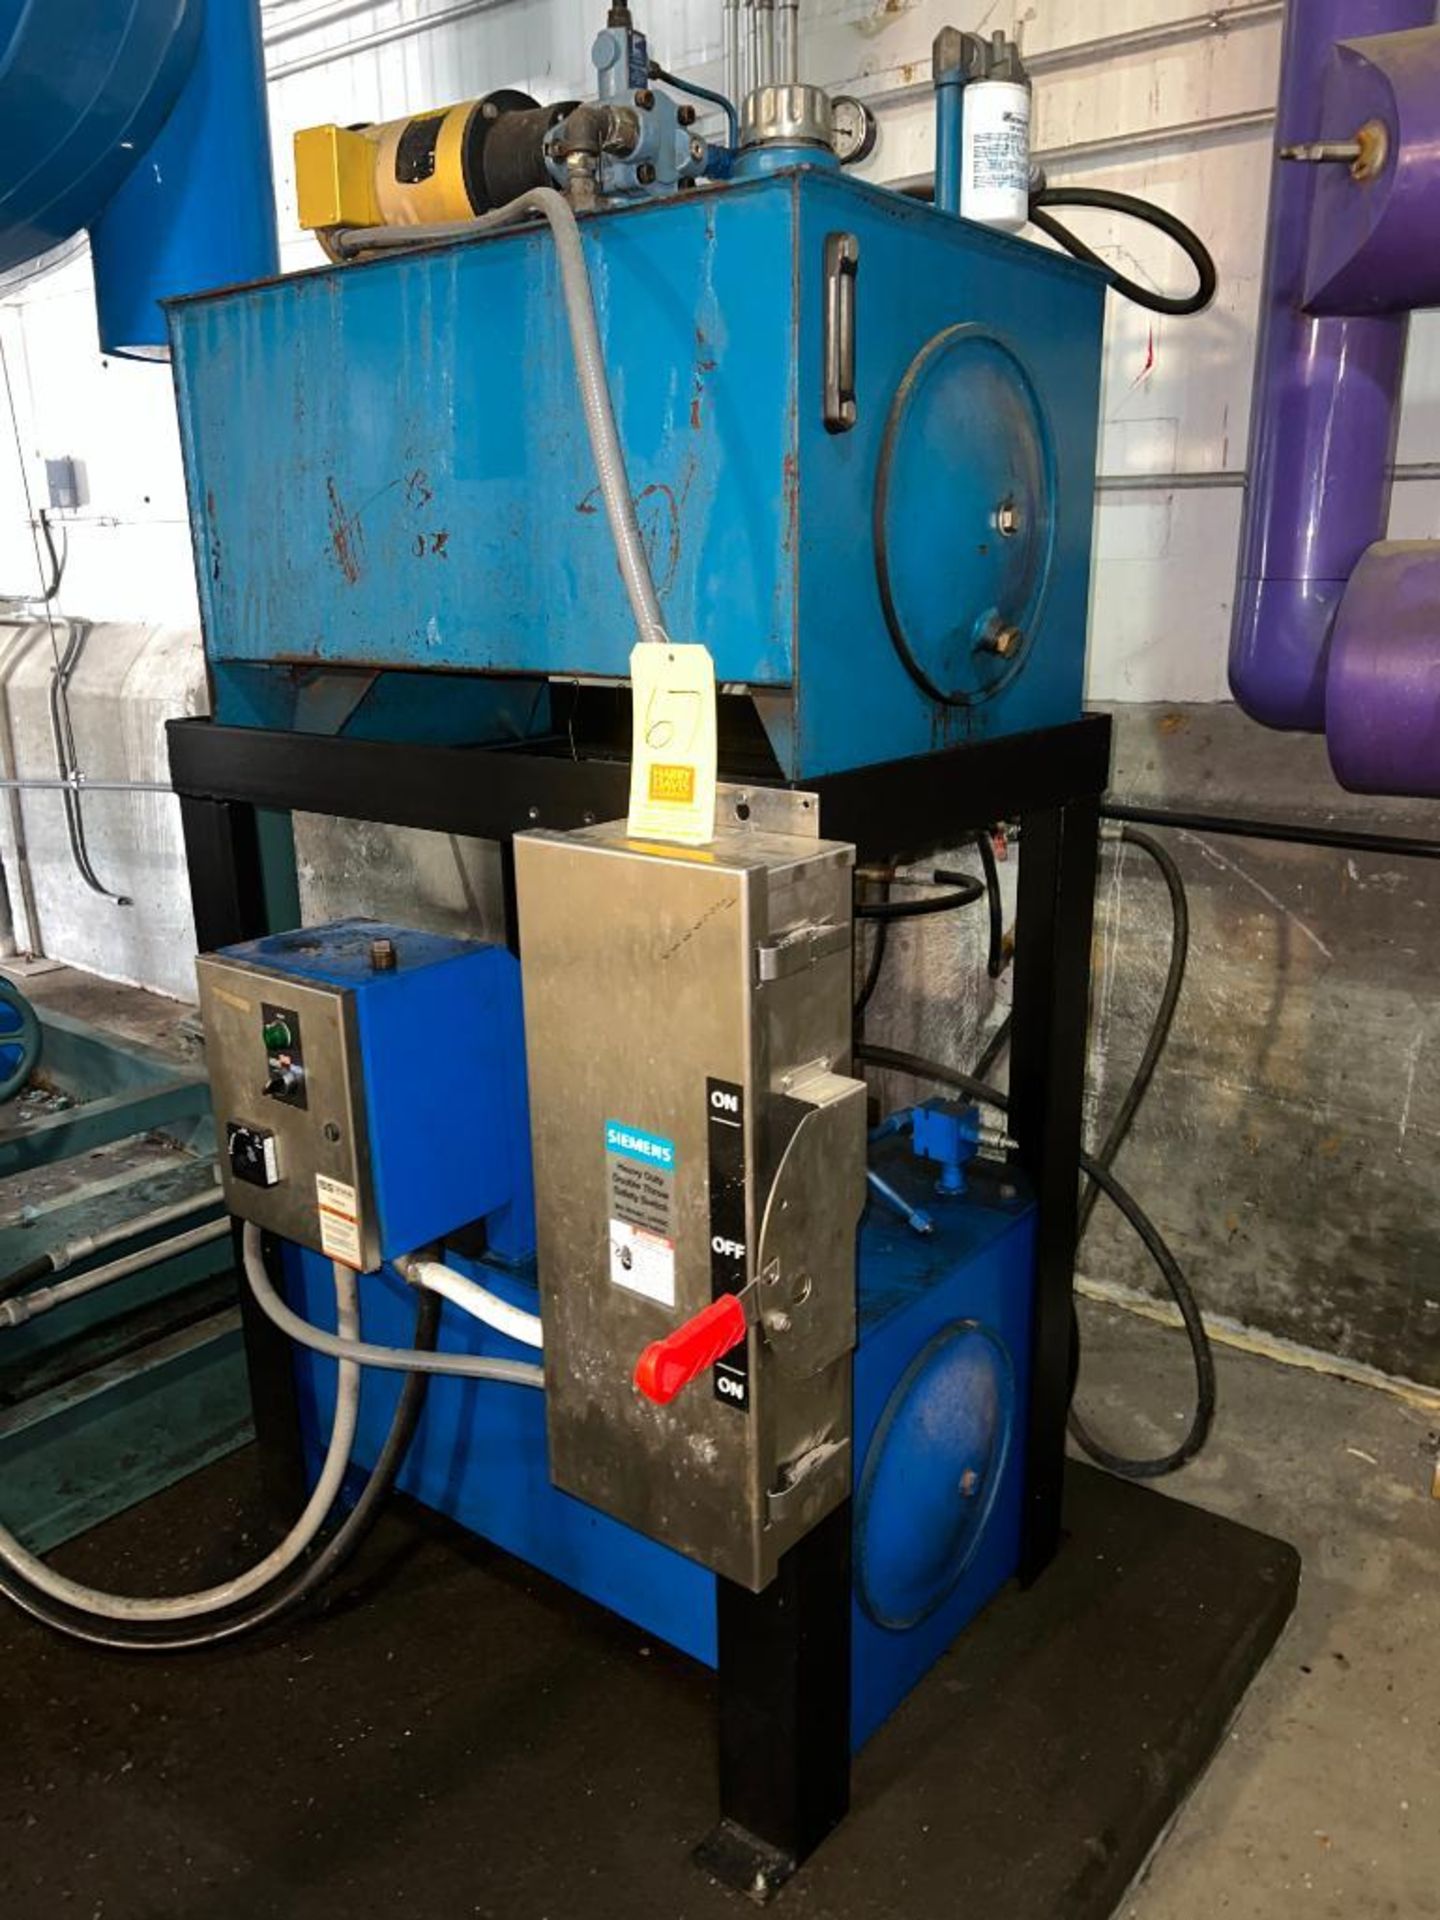 5 GPM 600 PSI (2) Tank Hydraulic System with Starter and Siemens Safety Switch - Rigging Fee: $400